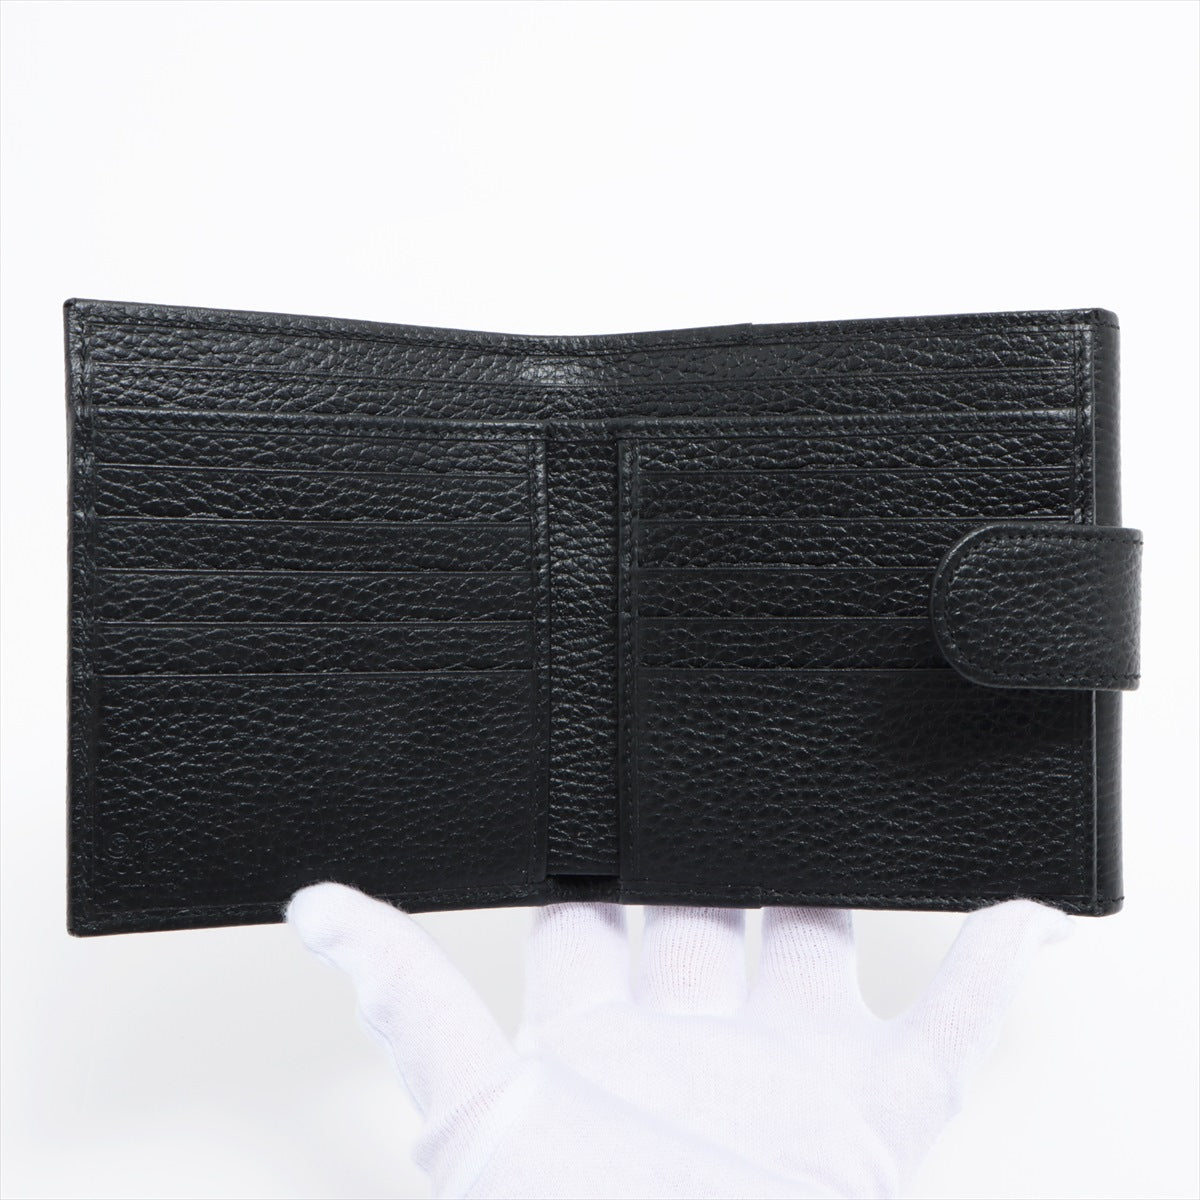 Gucci Interlocking G 615525 Leather Compact Wallet Black